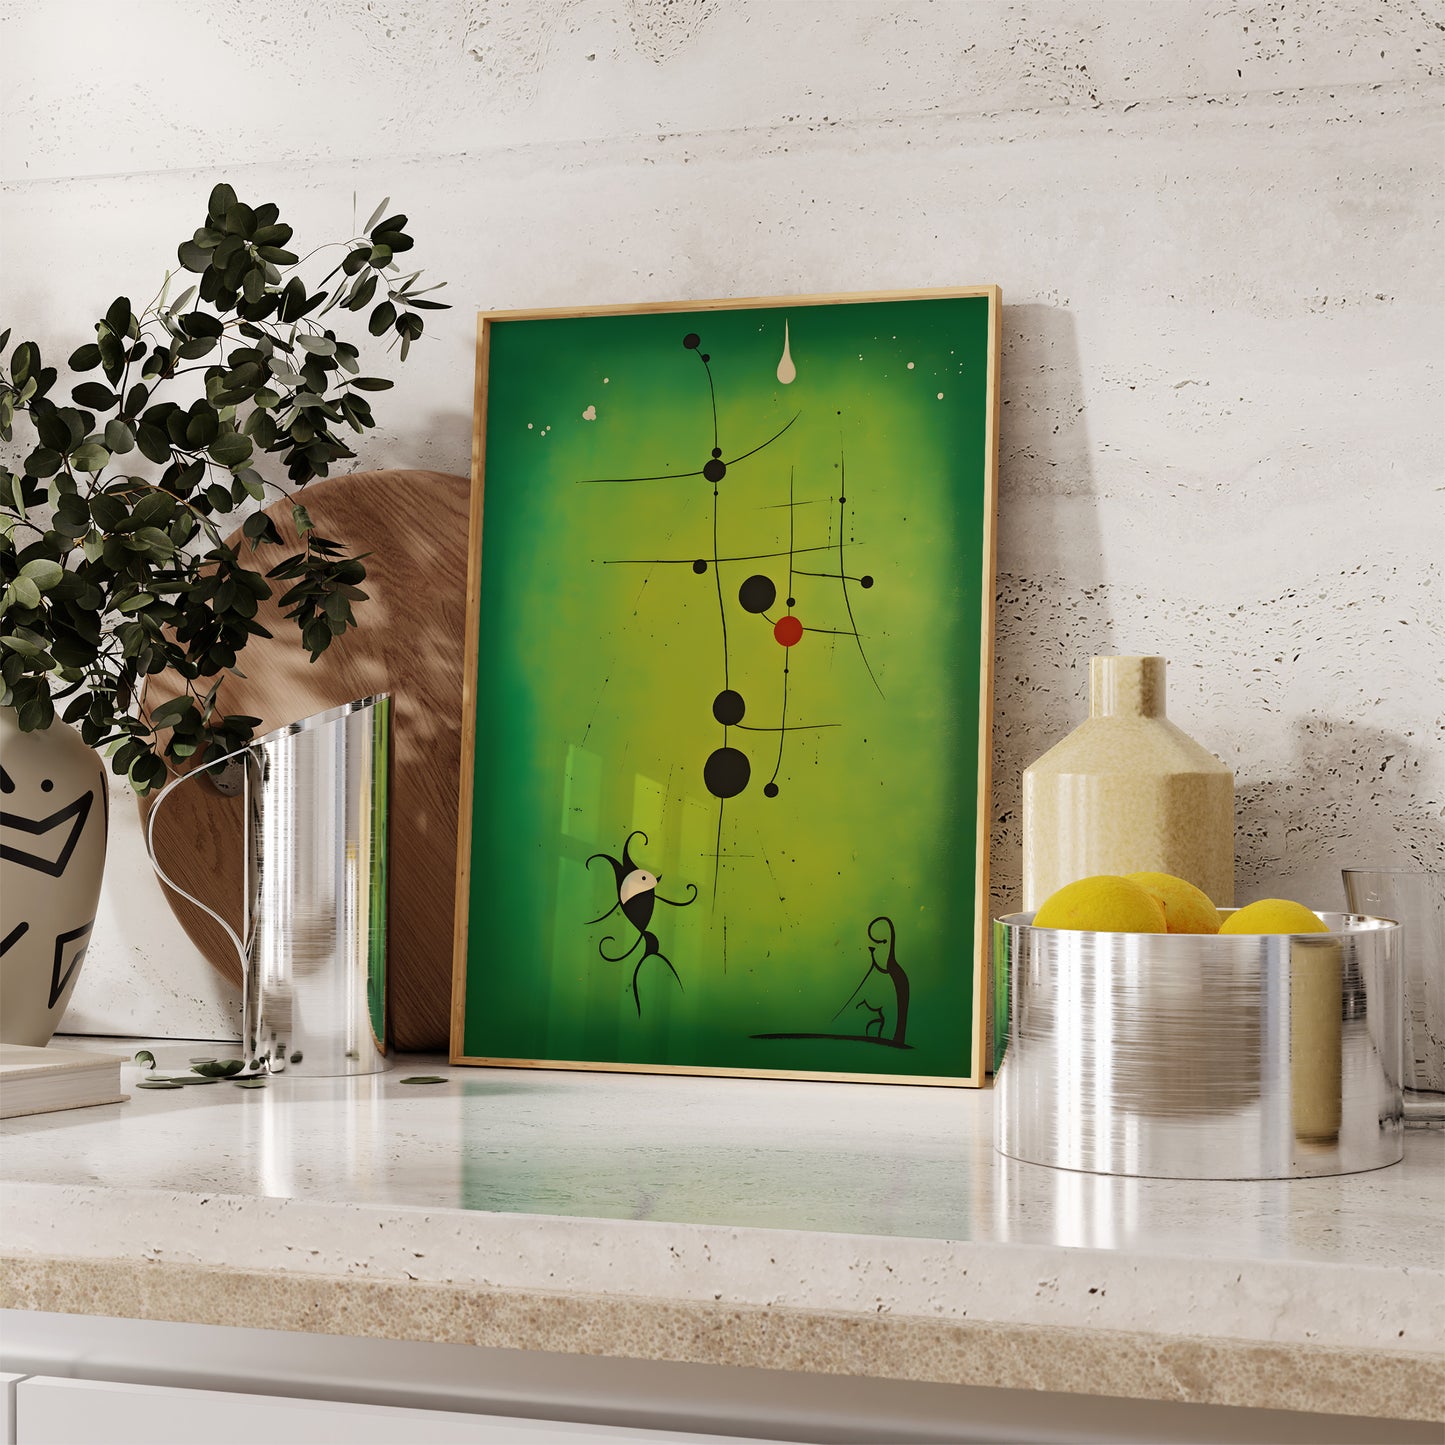 Modern abstract art in a frame on a kitchen countertop with decorative vases and plant.